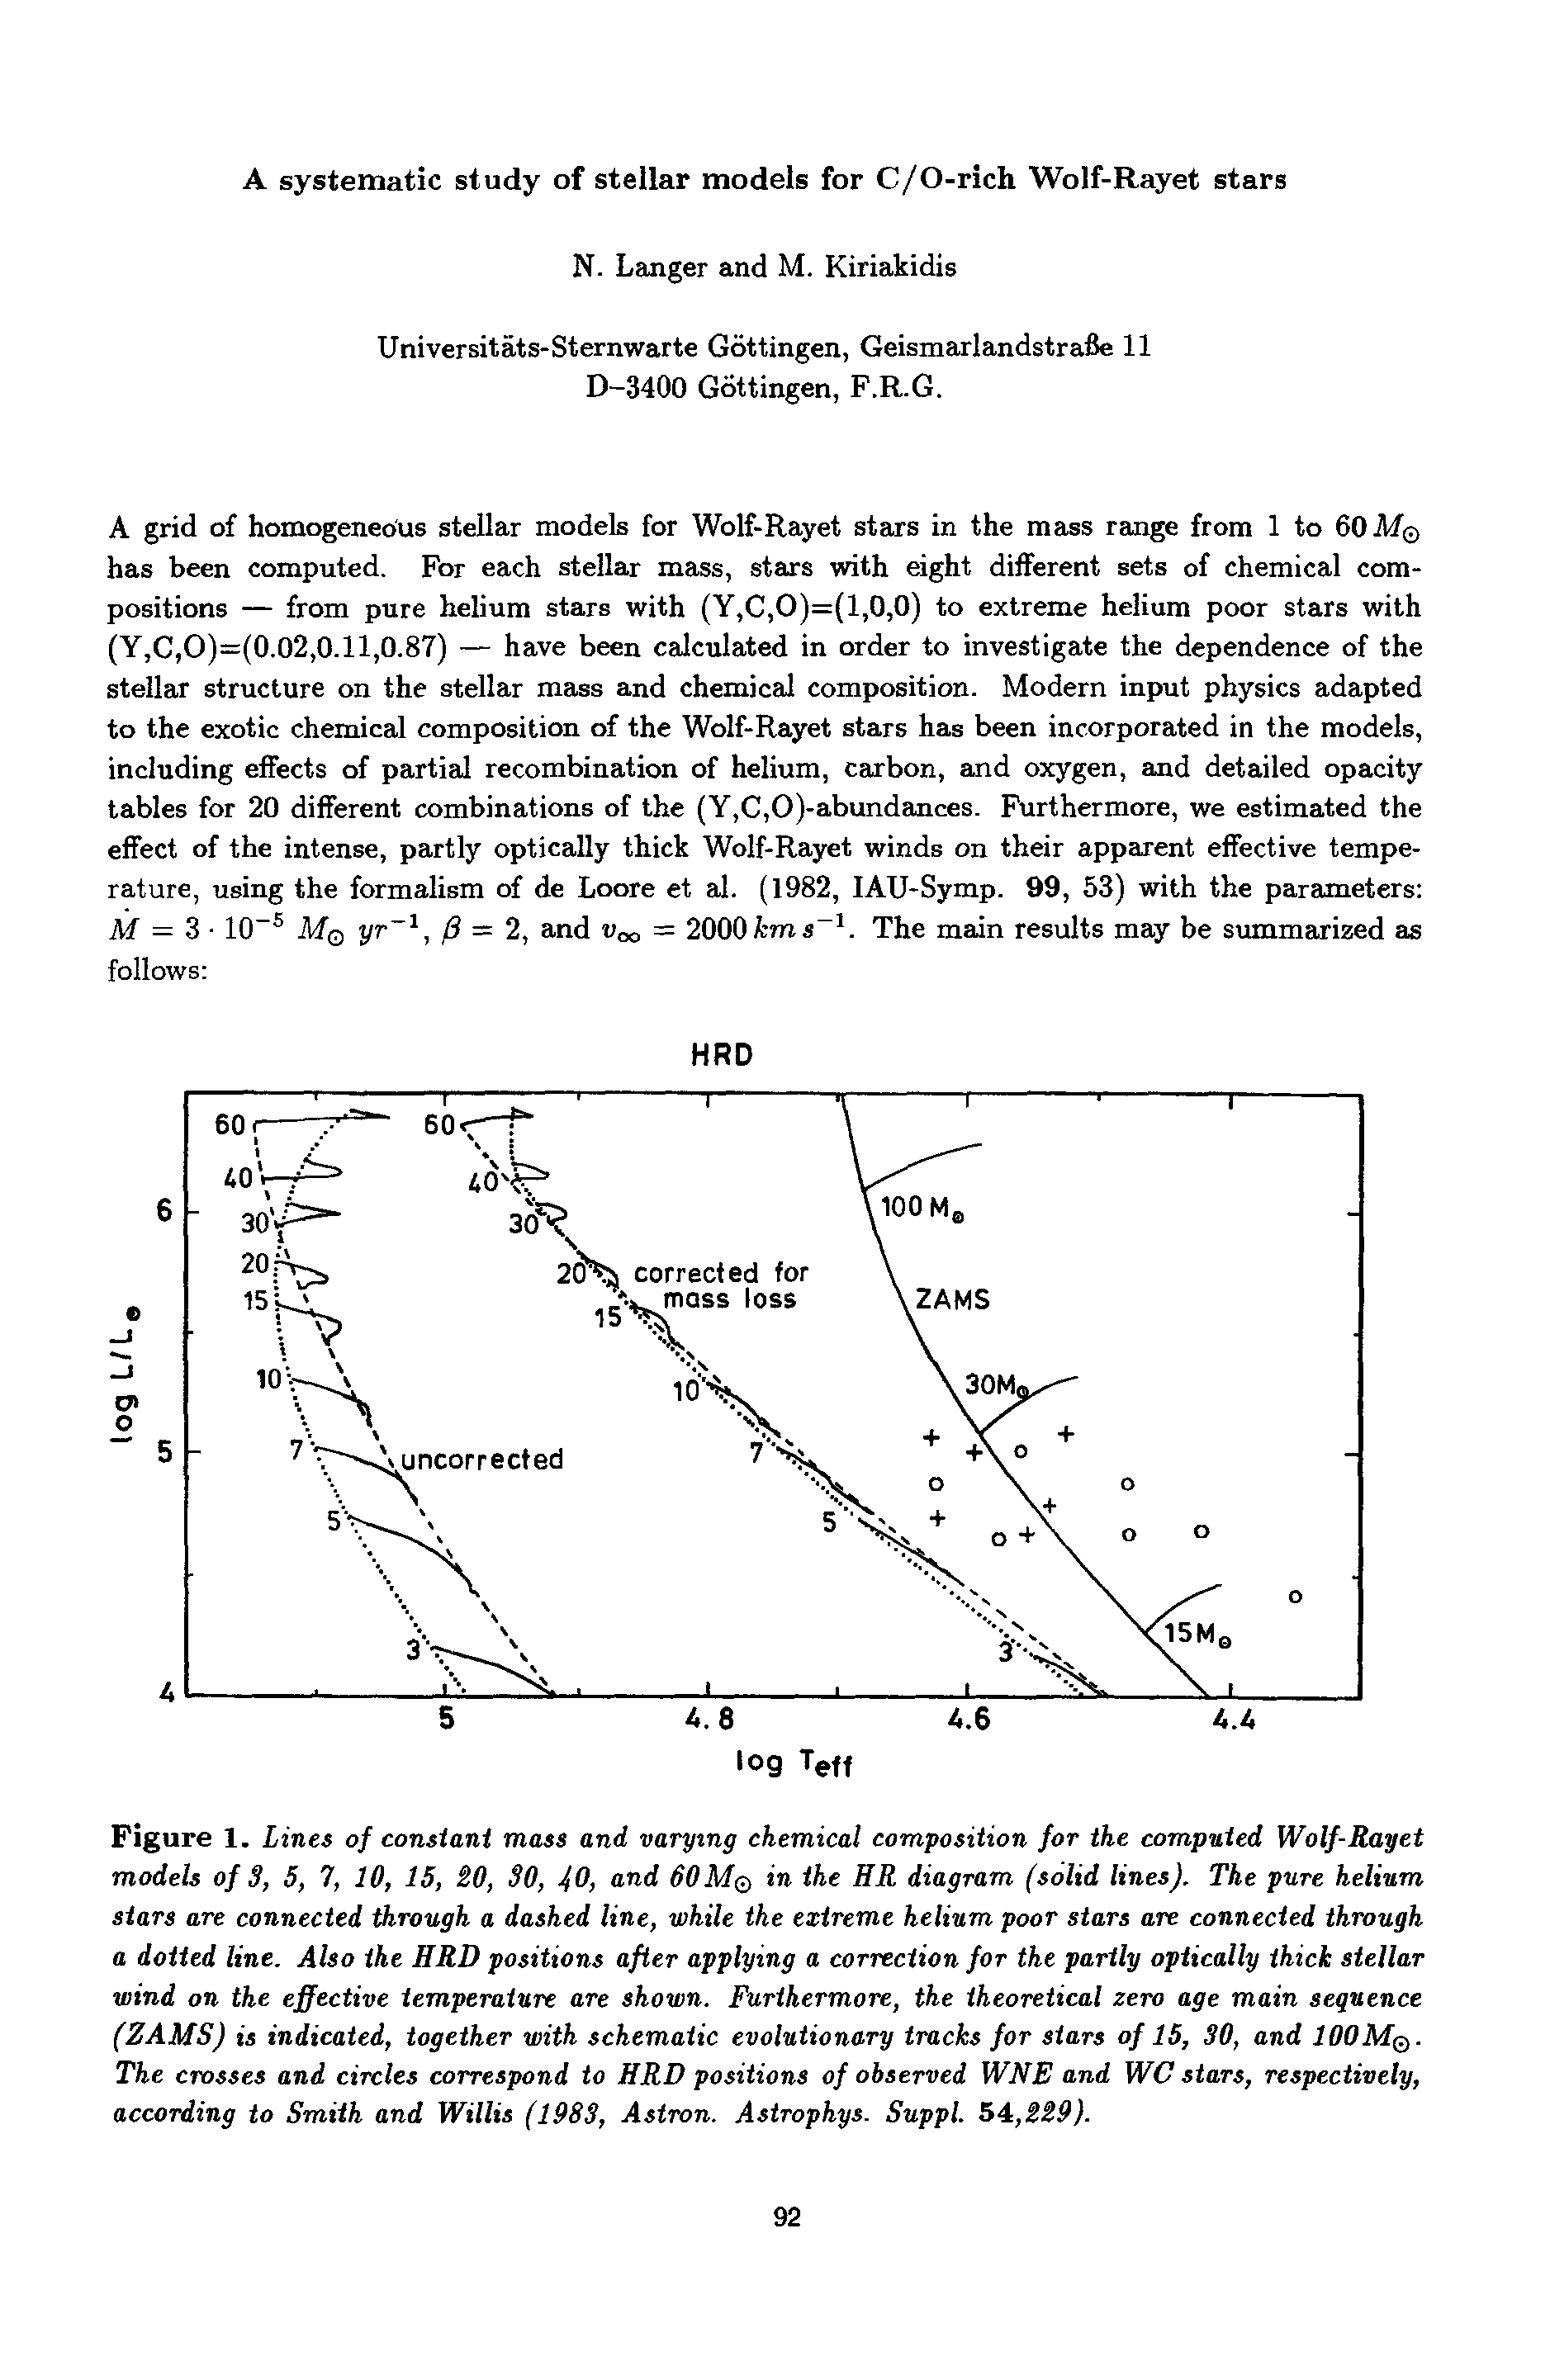 Figure 1. Lines of constant mass and varying chemical composition for the computed Wolf-Rayet models of 3, 5, 7, 10, 15, 20, SO, 40, and 60Mq in the HR diagram (solid lines). The pure helium stars are connected through a dashed line, while the extreme helium poor stars are connected through a dotted line. Also the HRD positions after applying a correction for the partly optically thick stellar wind on the effective temperature are shown. Furthermore, the theoretical zero age main sequence (ZAMS) is indicated, together with schematic evolutionary tracks for stars of 15, 30, and IOOMq. The crosses and circles correspond to HRD positions of observed WNE and WC stars, respectively, according to Smith and Willis (198S, Astron. Astrophys. Suppl. 54,229).